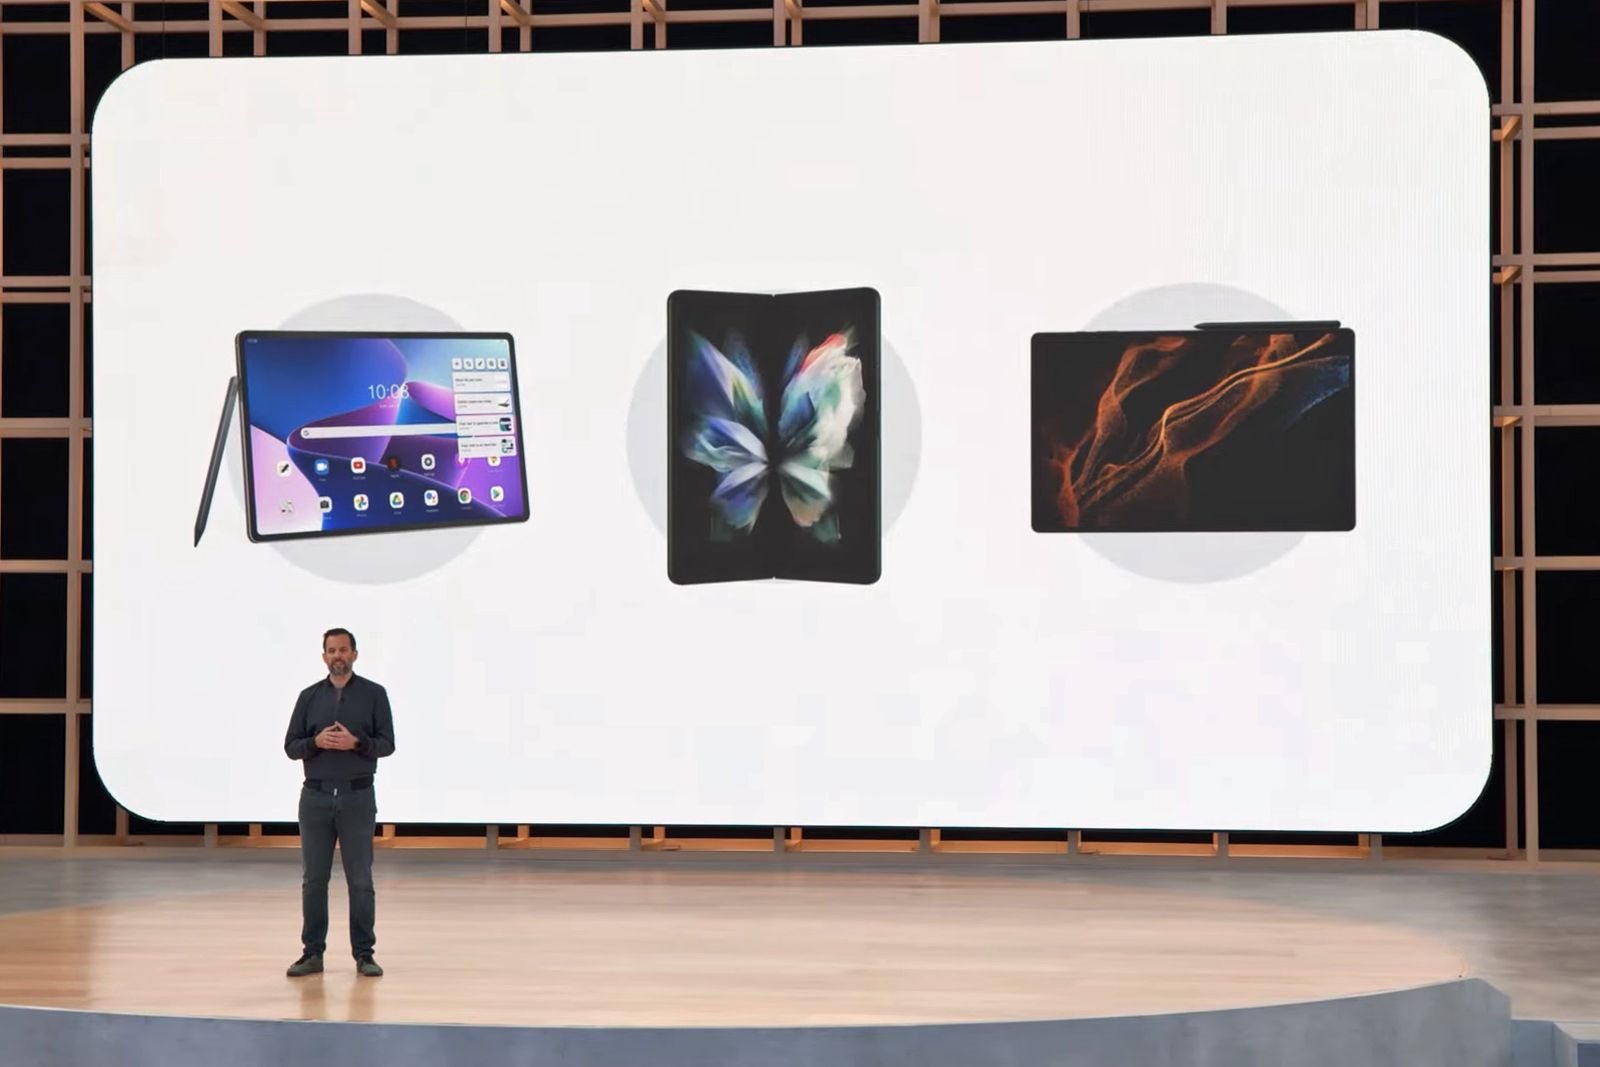 It looks like Google is finally taking tablets seriously photo 1